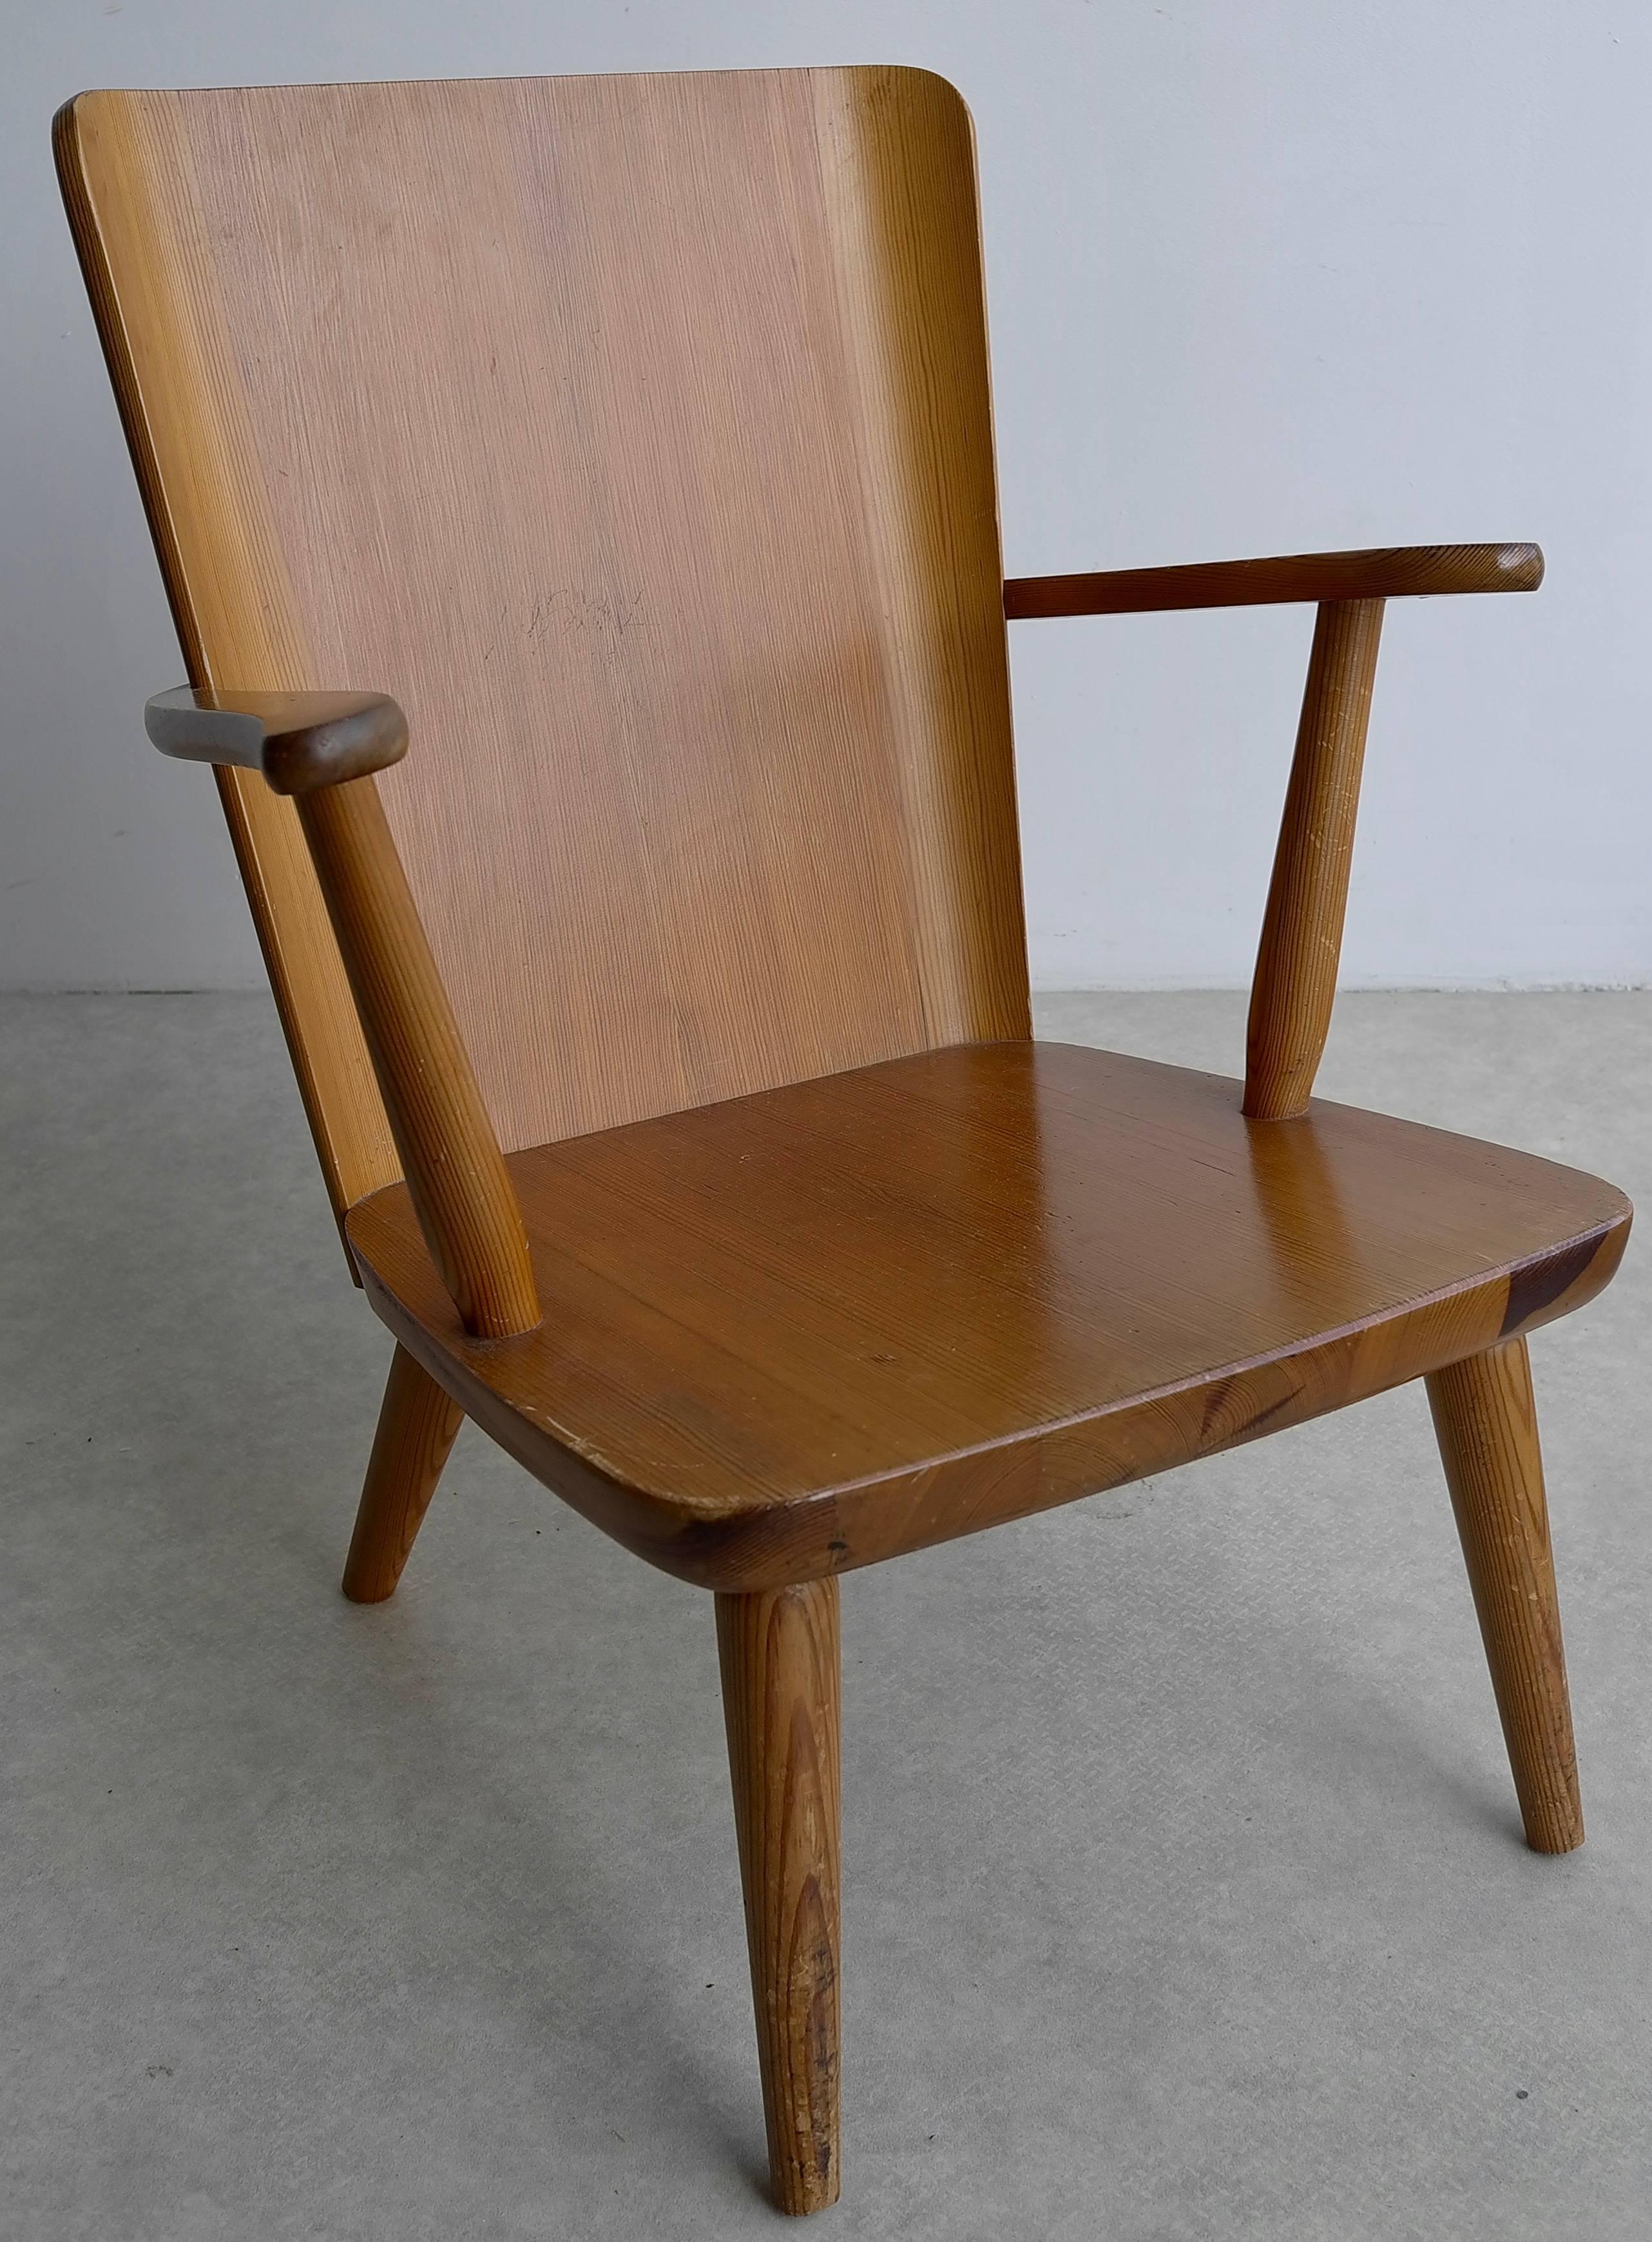 Mid-Century Modern Rare Swedish Armchair in Pine by Goran Malmvall voor Svensk Fur, 1940s For Sale